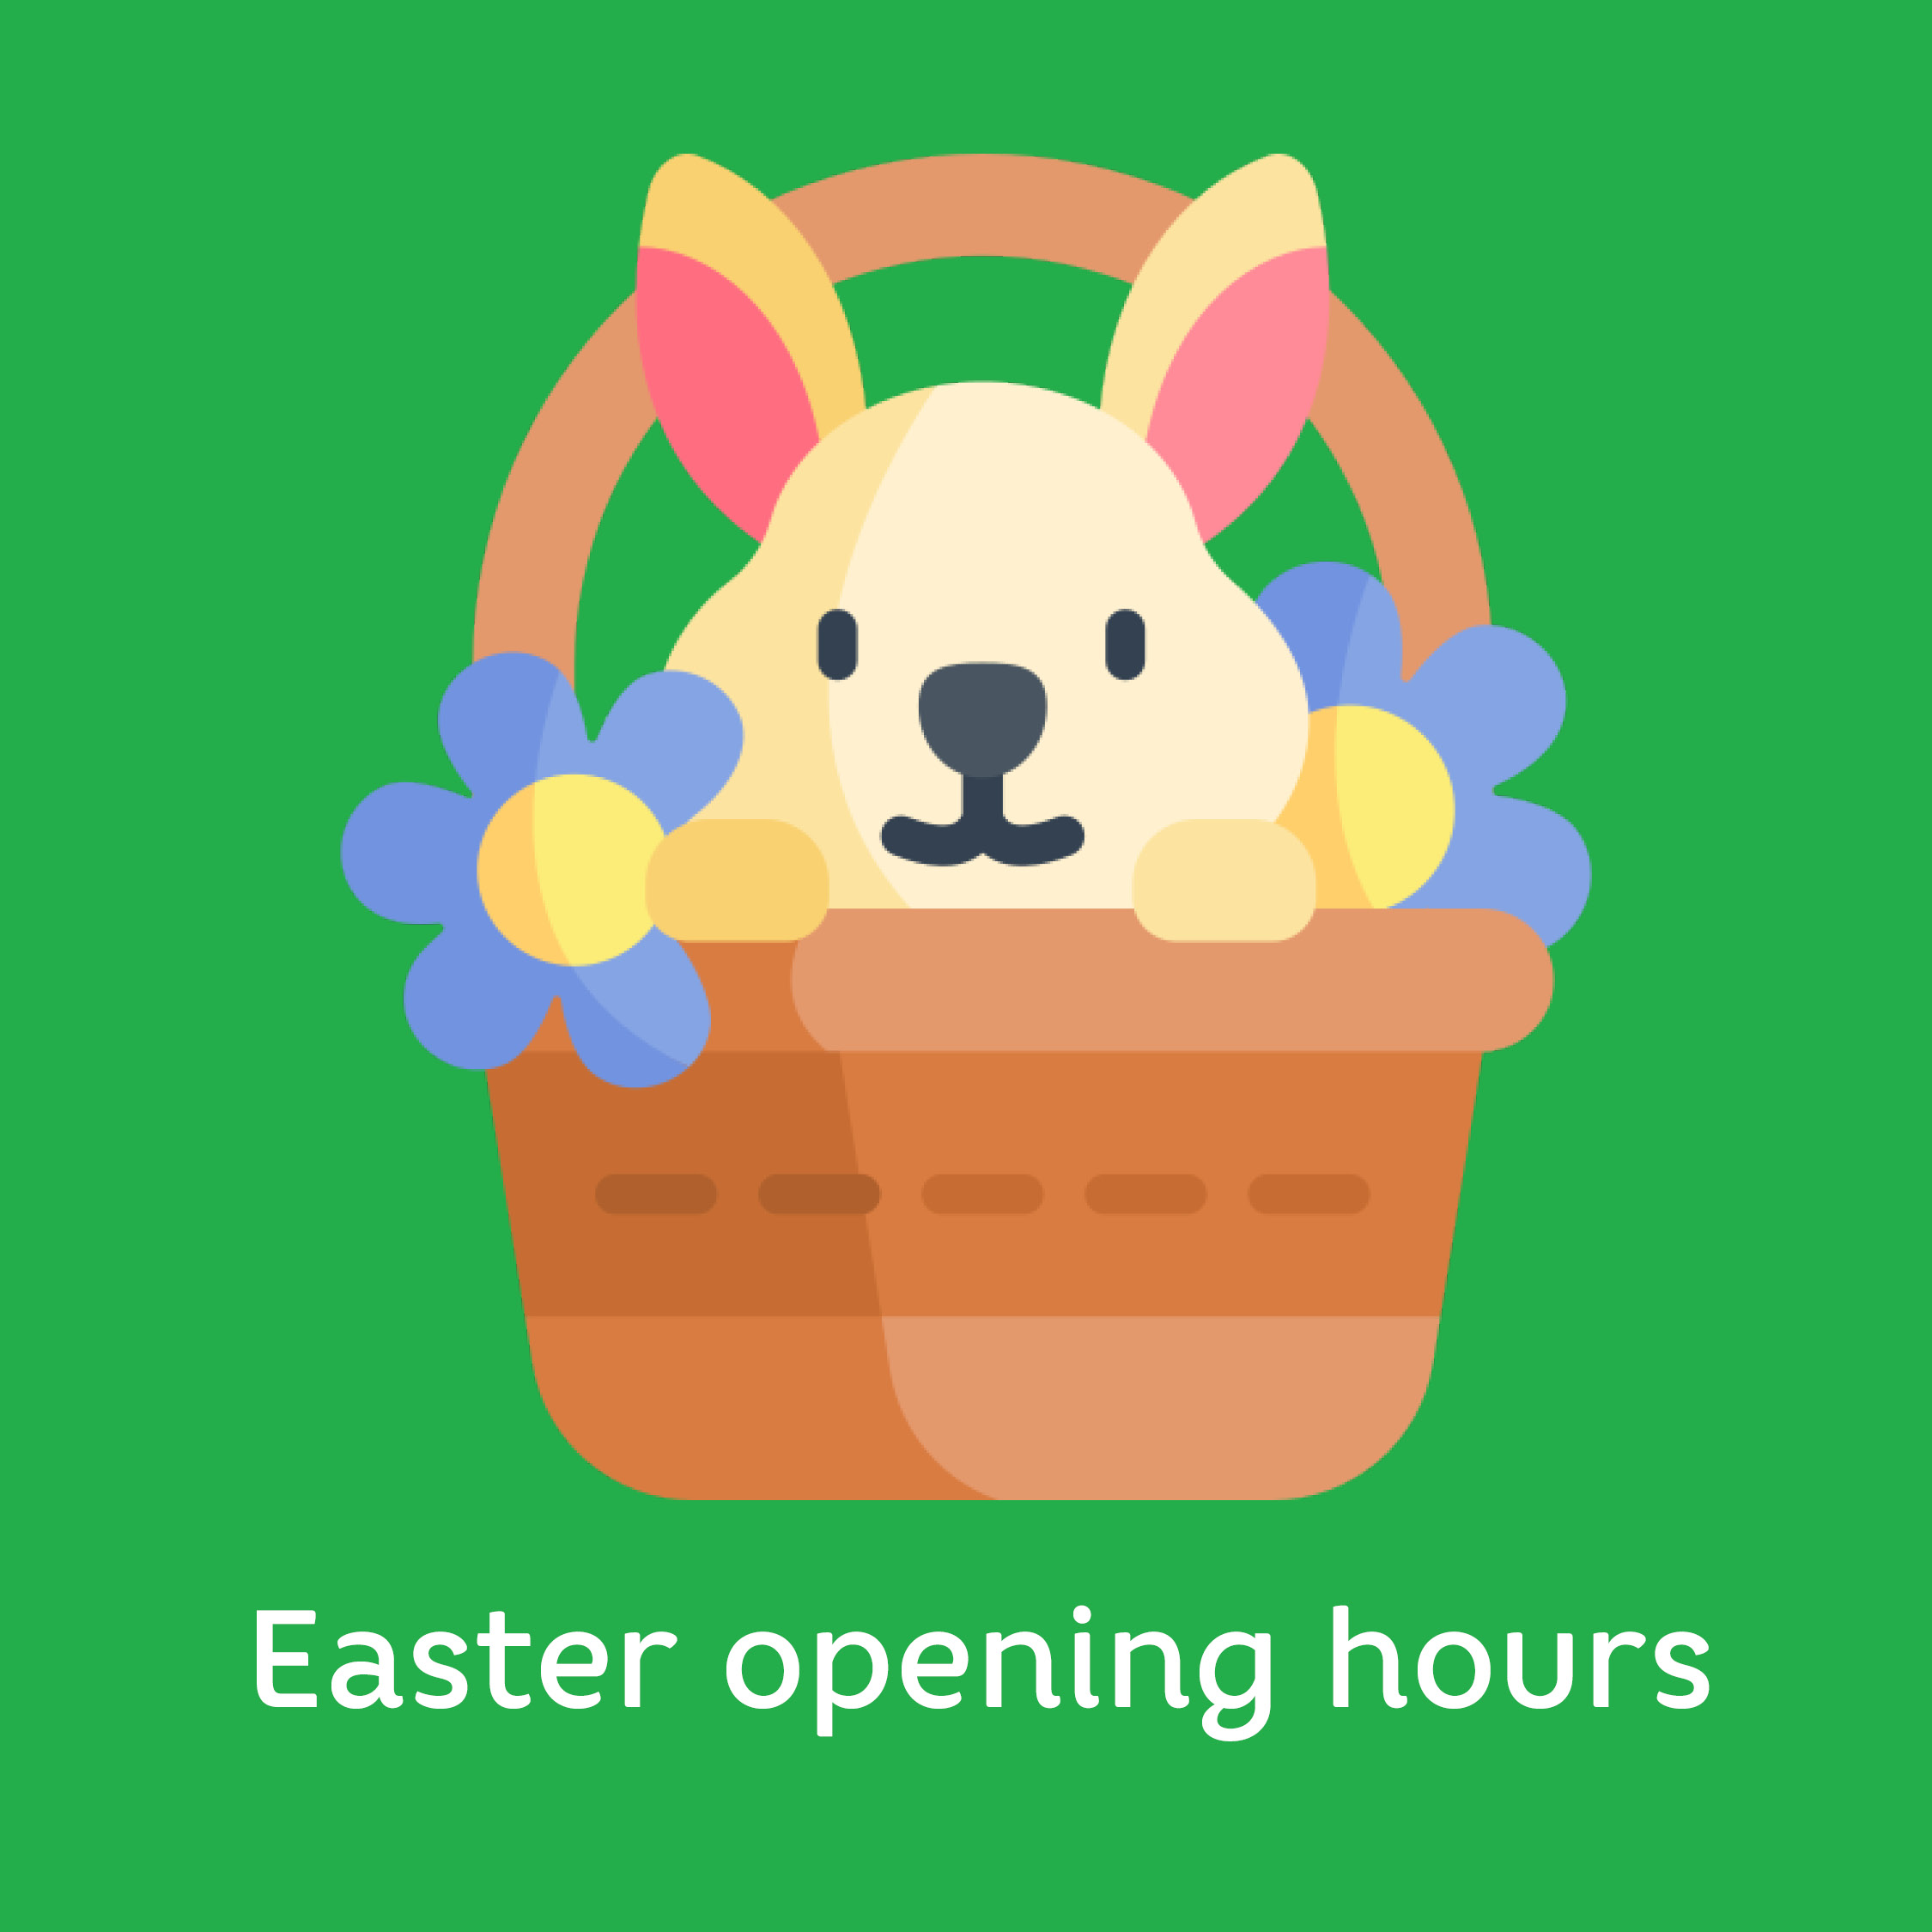 Easter opening hours 2023 - illustration of Easter bunny in a basket surrounded by blue and yellow flowers